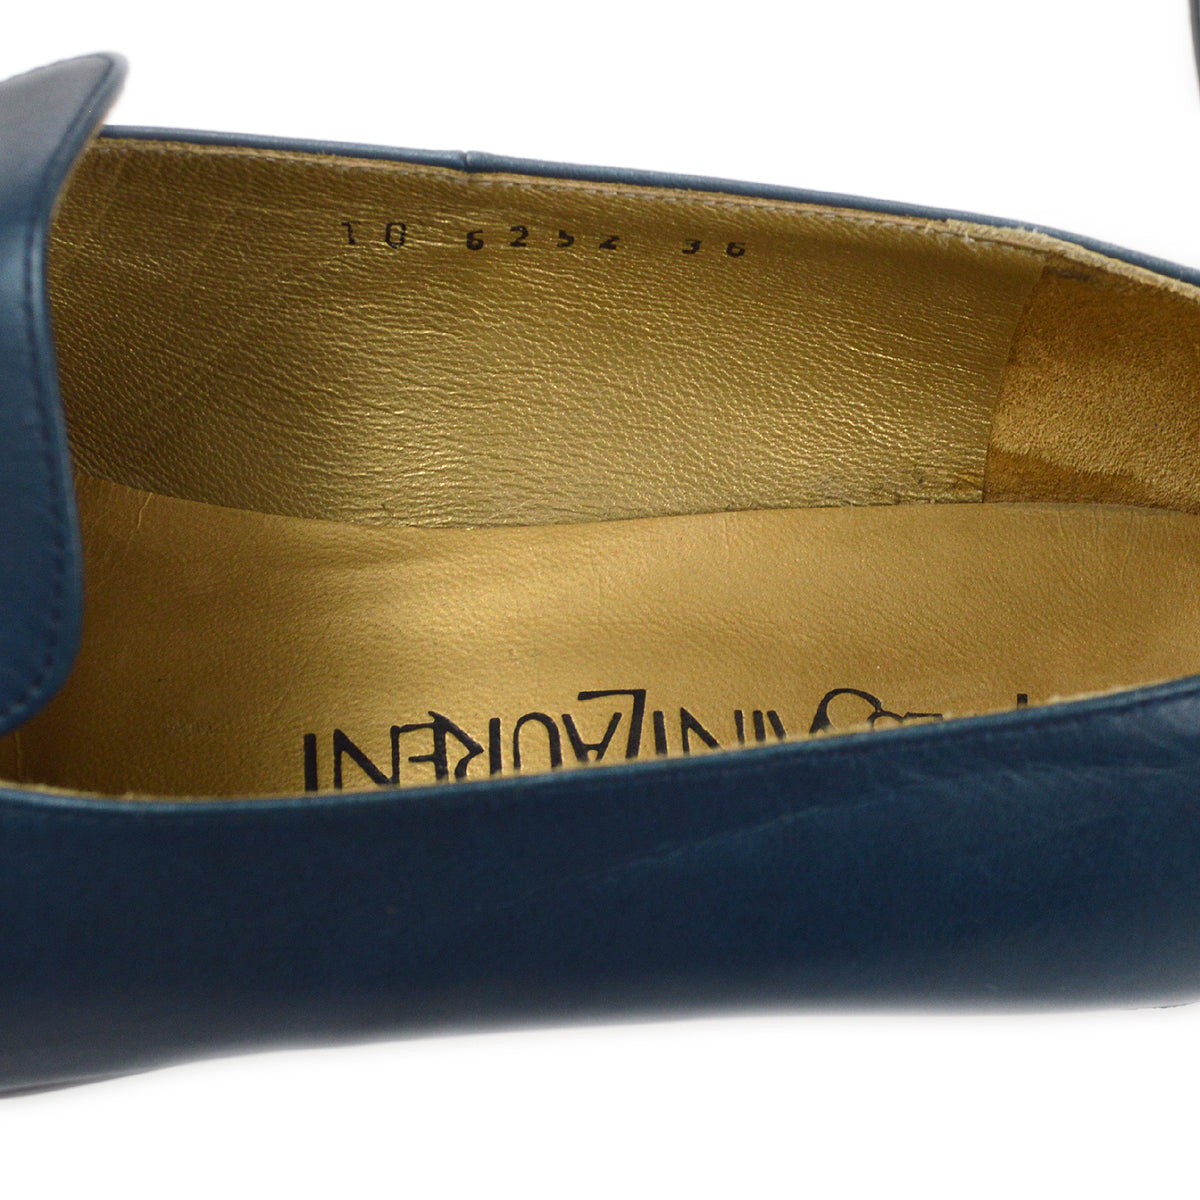 Yves Saint Laurent Loafers Shoes 